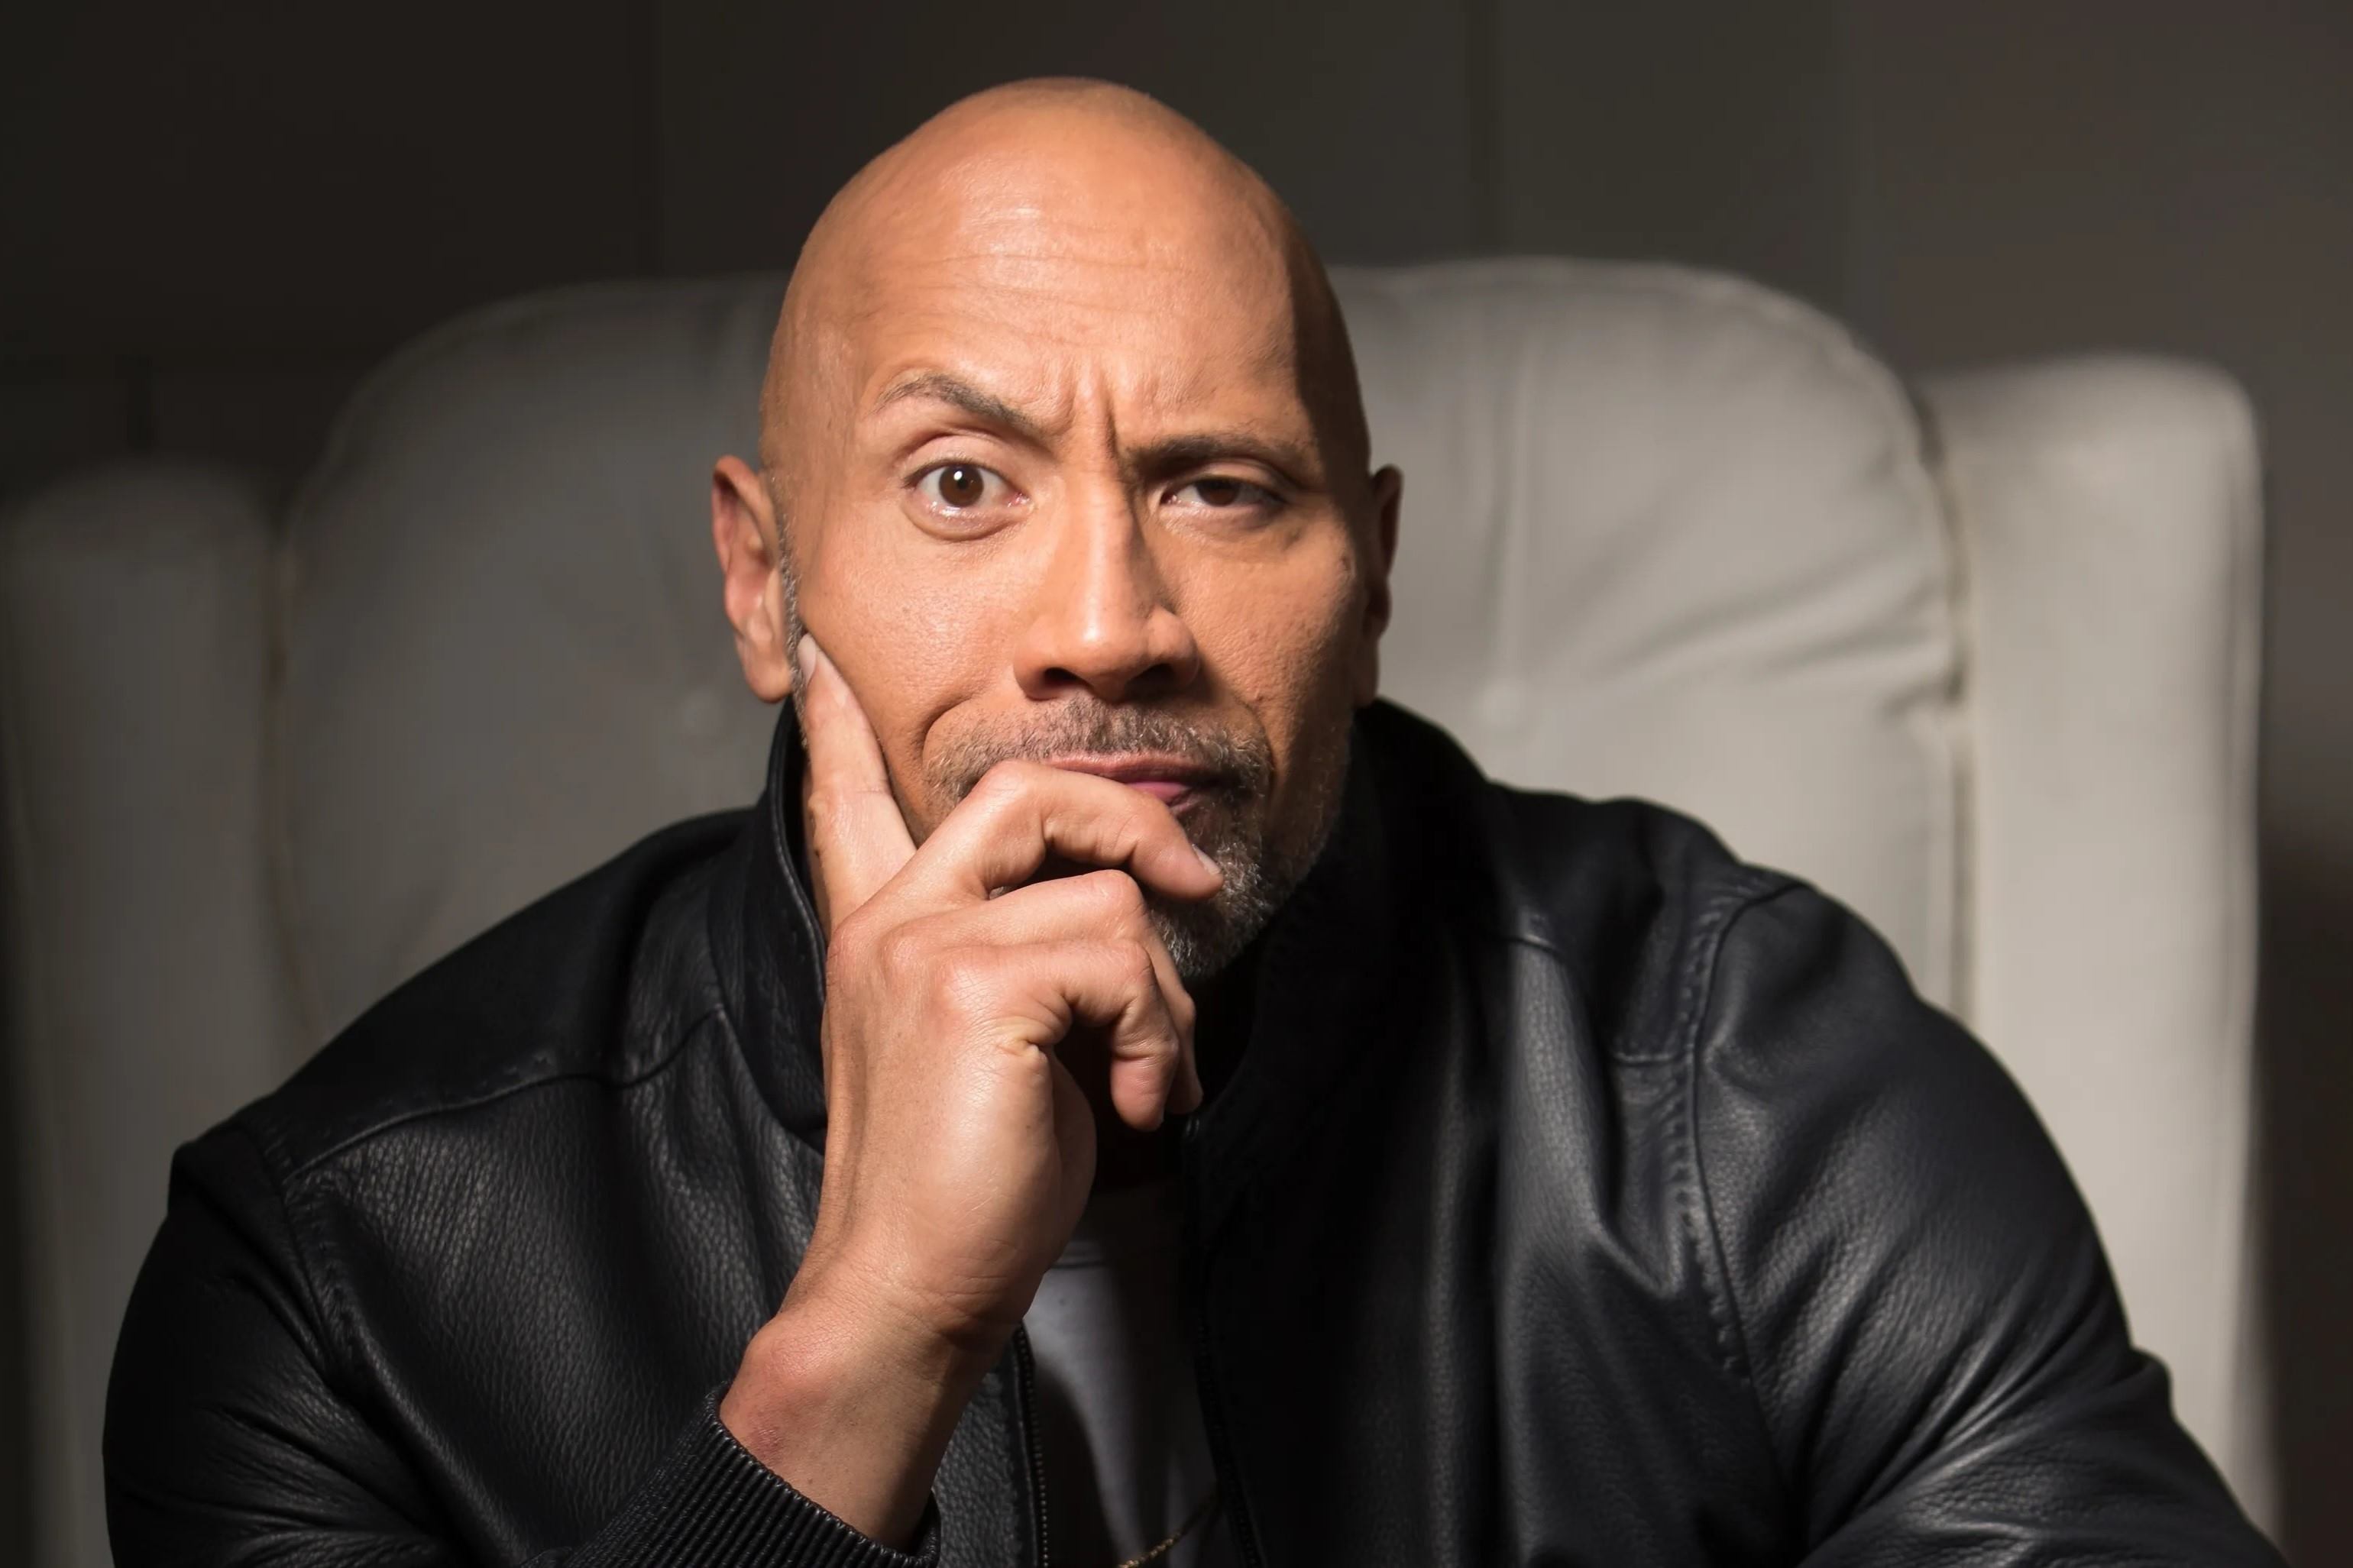 The Rock’s Iconic Eyebrow Raise: The Ultimate Gesture Revealed!